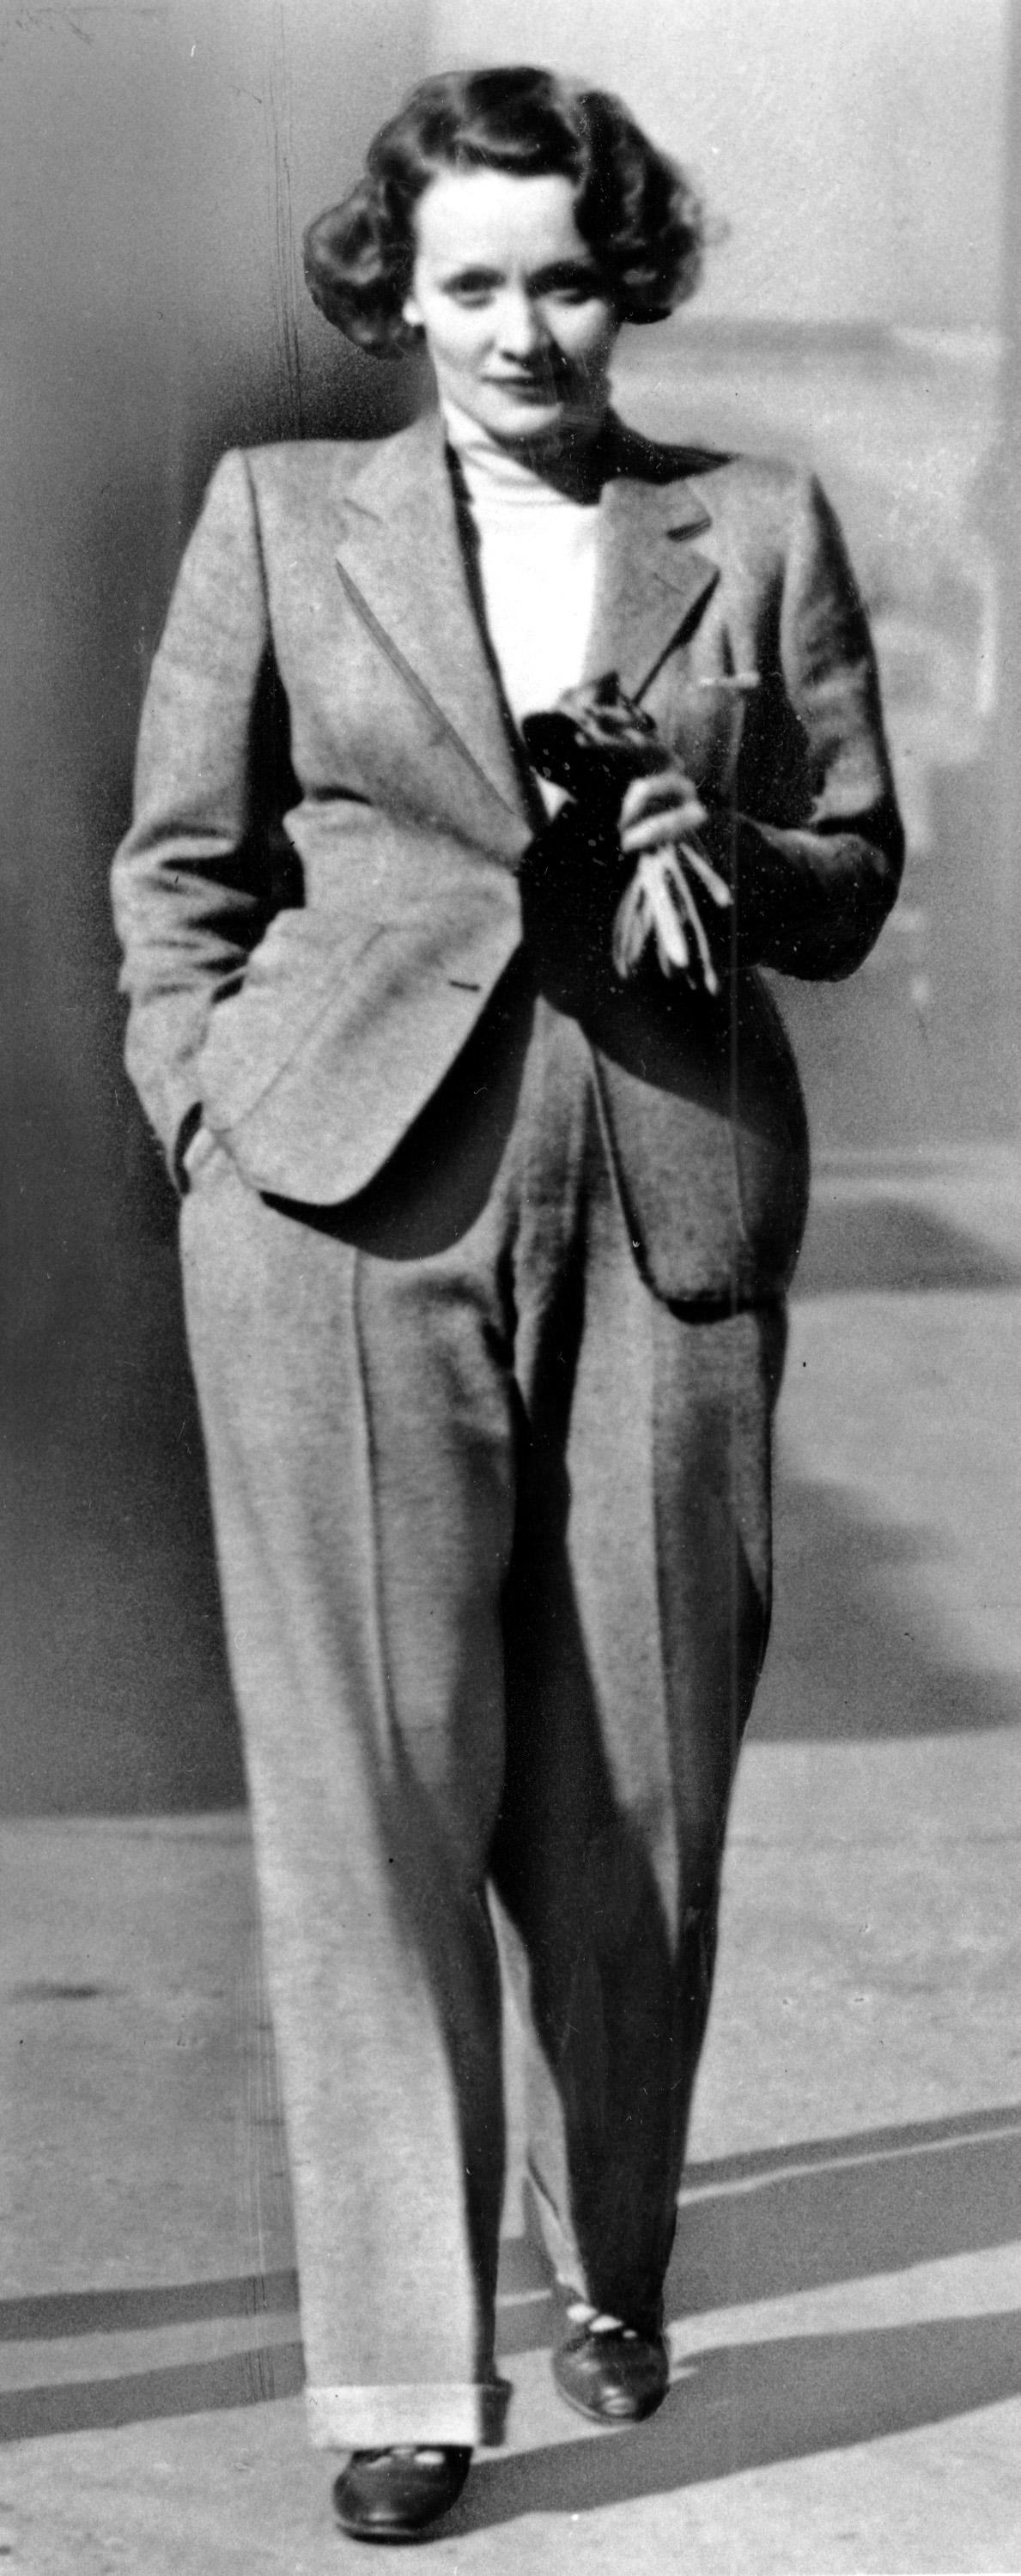 Actress Marlene Dietrich wears a trendsetting masculine style pant suit created by French couturiere Coco Chanel in 1933.